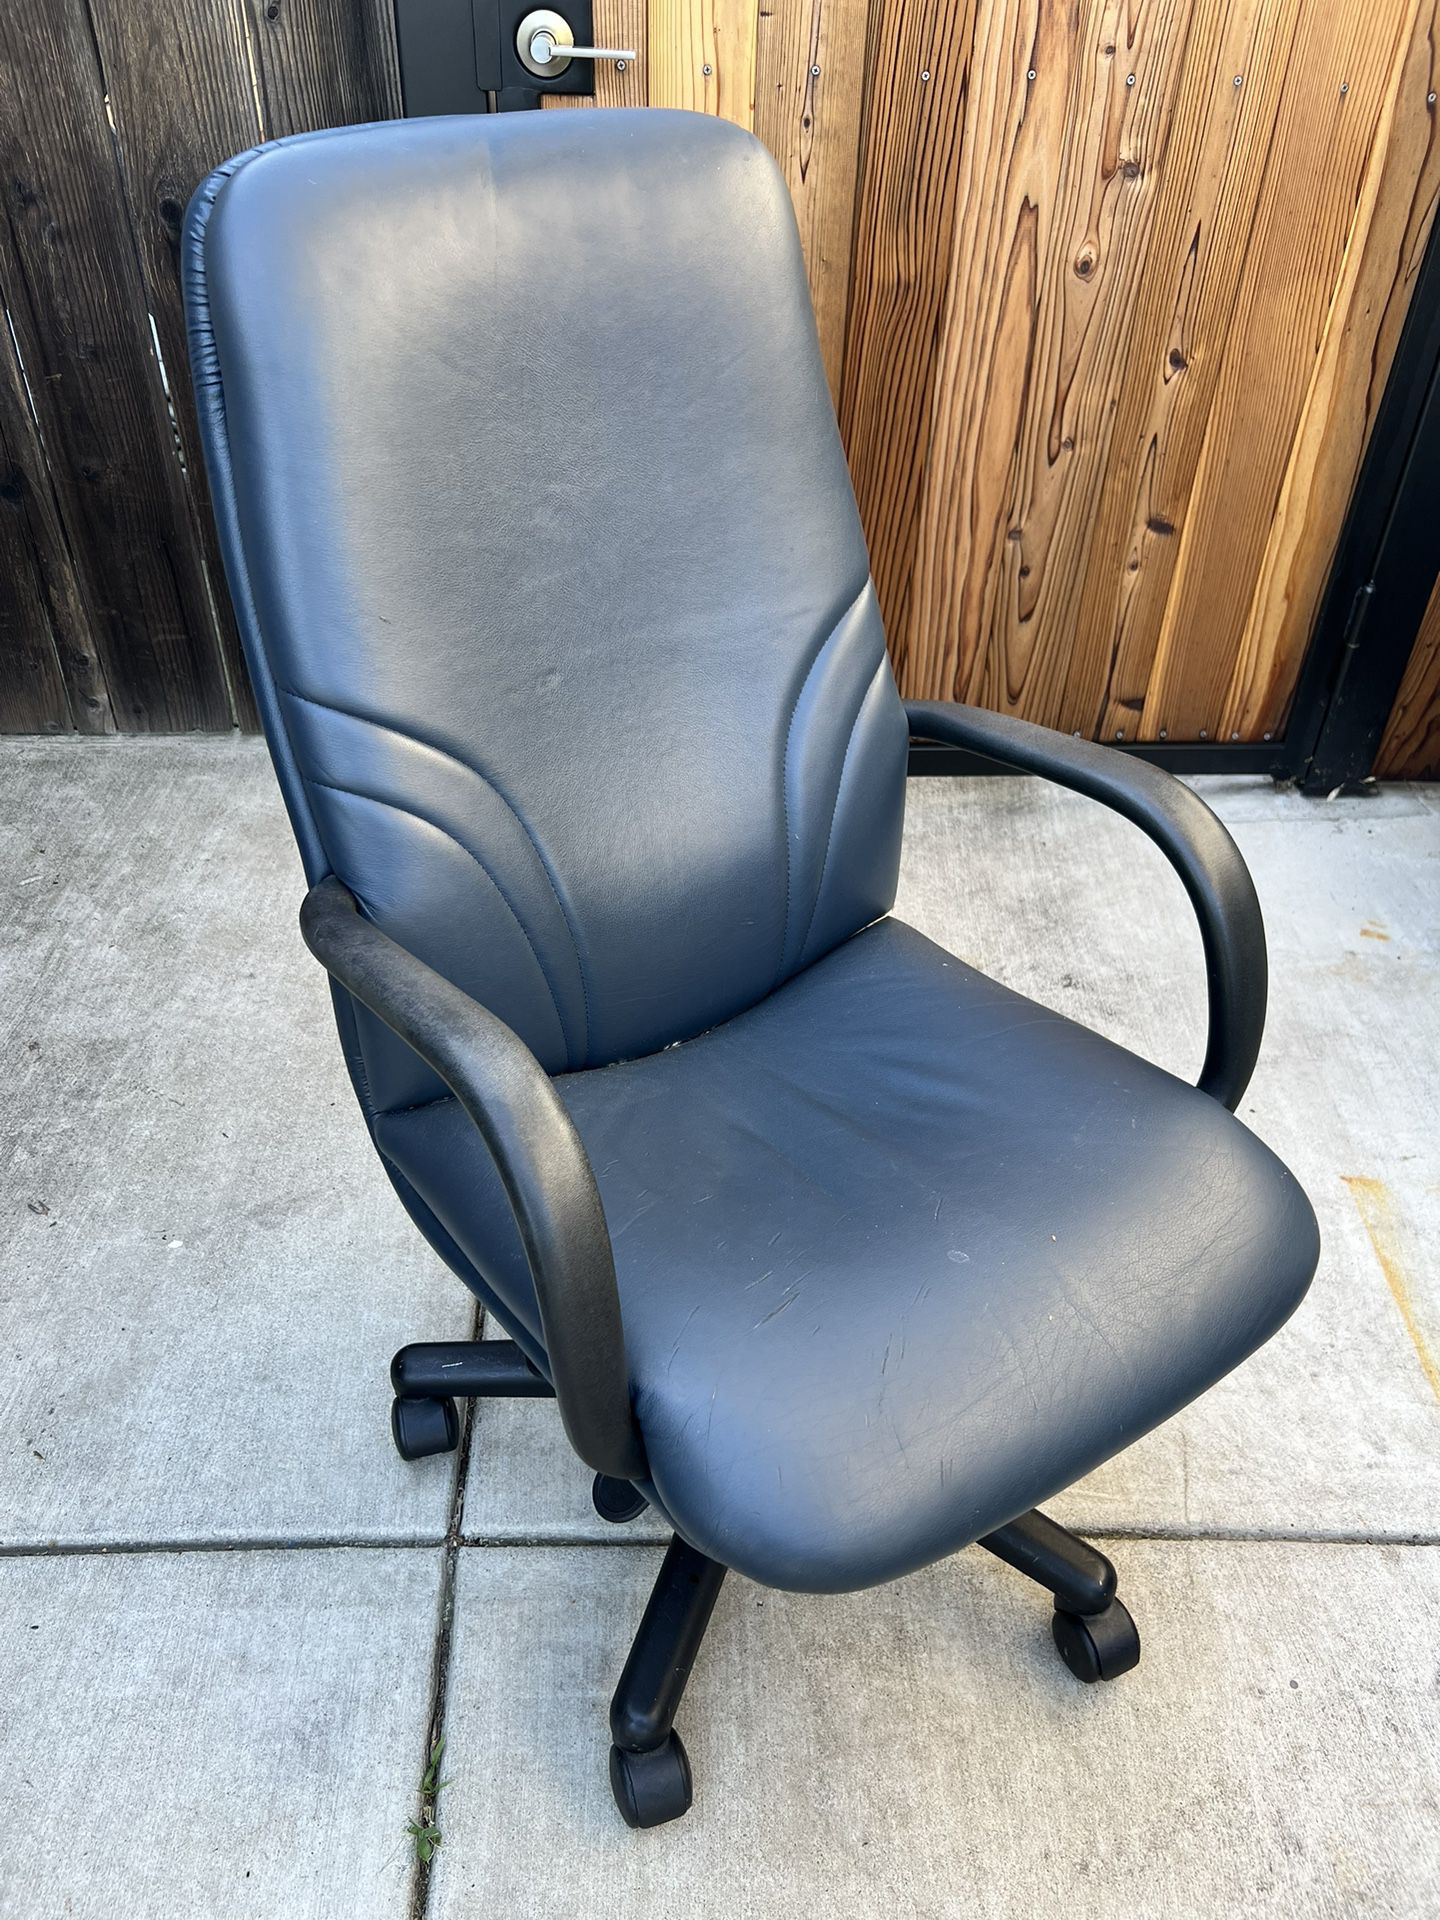 High Back Blue Leather Office/gaming Chair